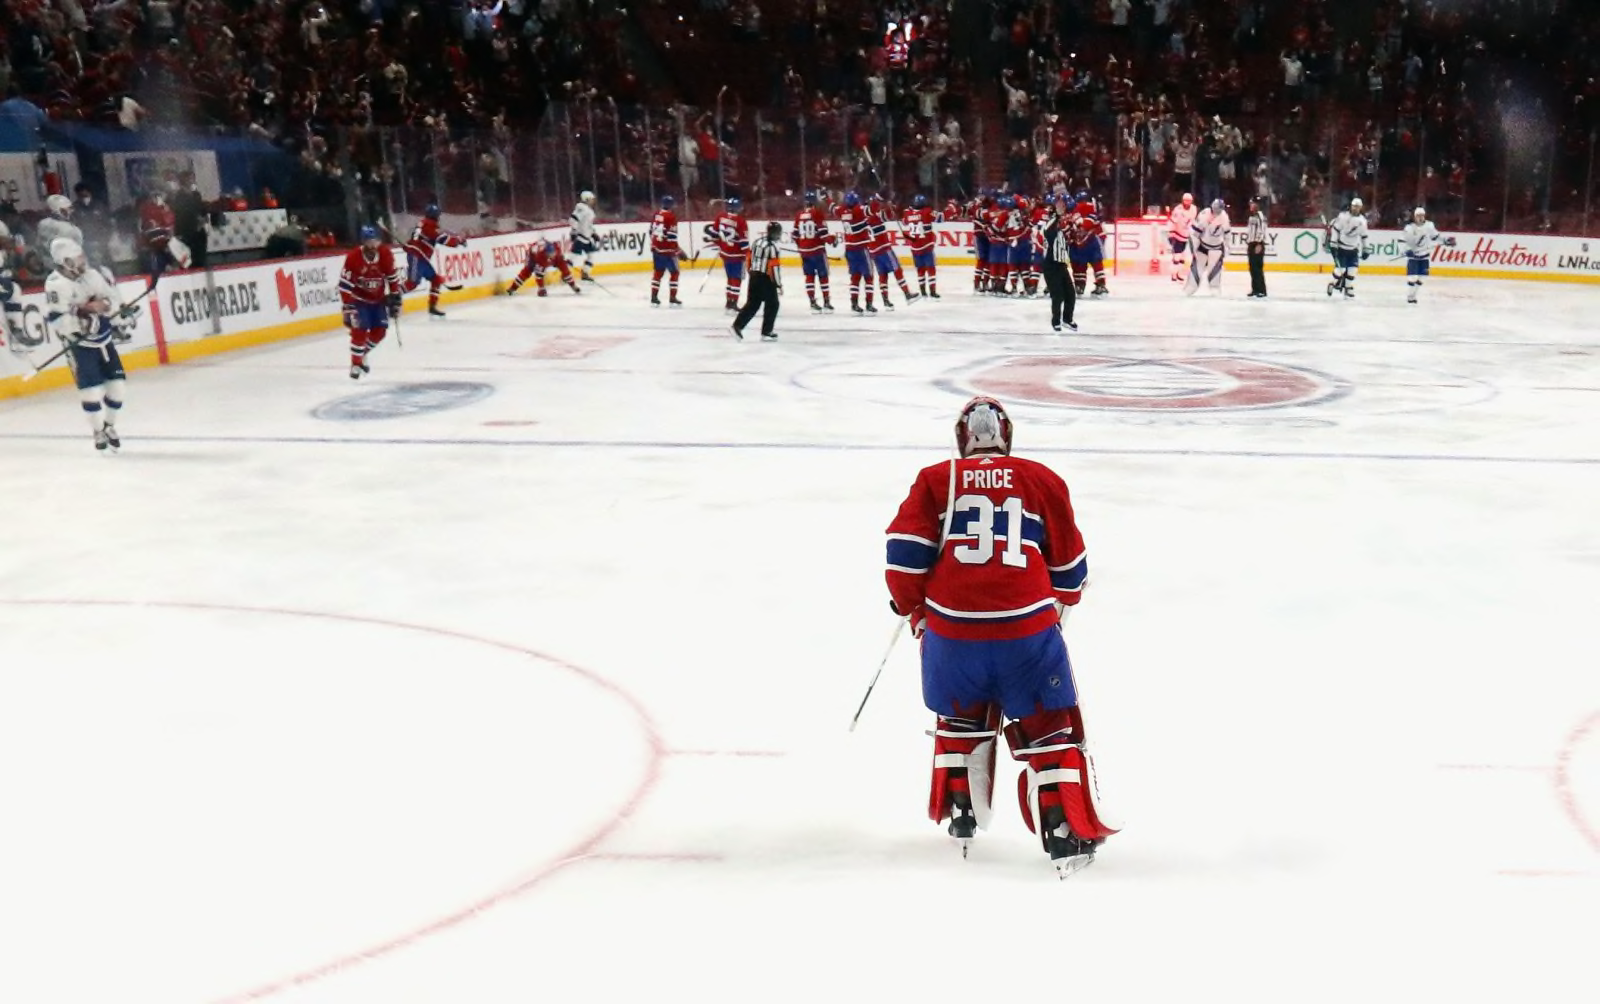 Canadiens goalie Carey Price among surprise players available to Kraken in  NHL expansion draft